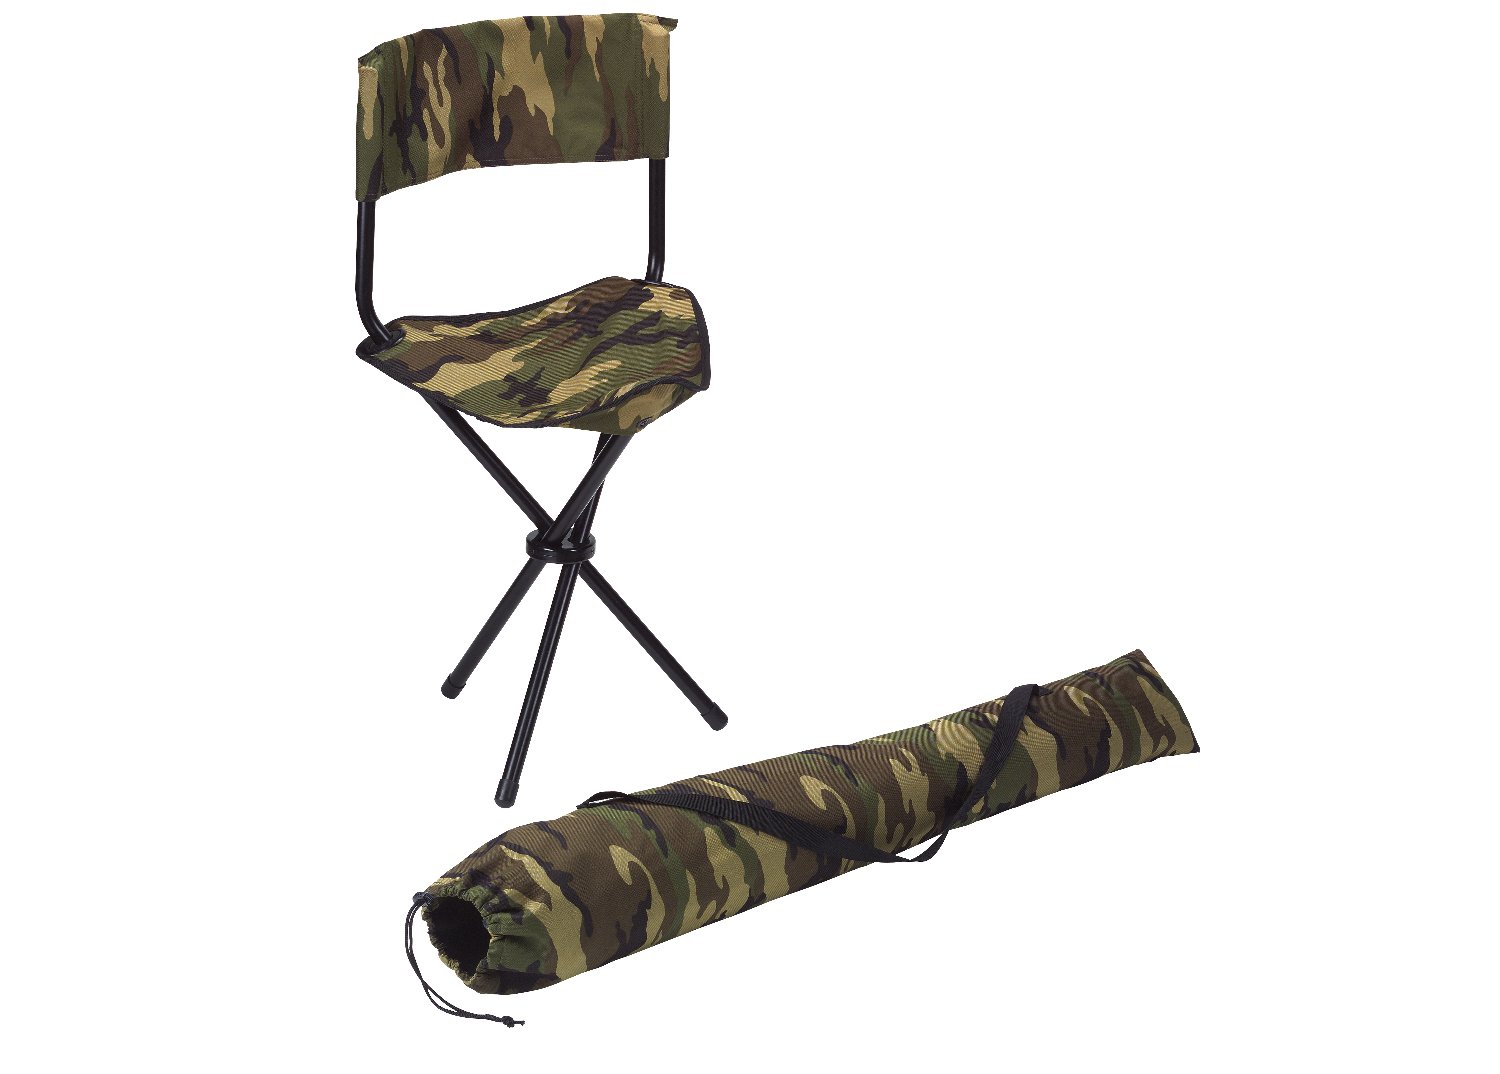 source: Woodland Camouflage Military Deluxe Collapsible Stool